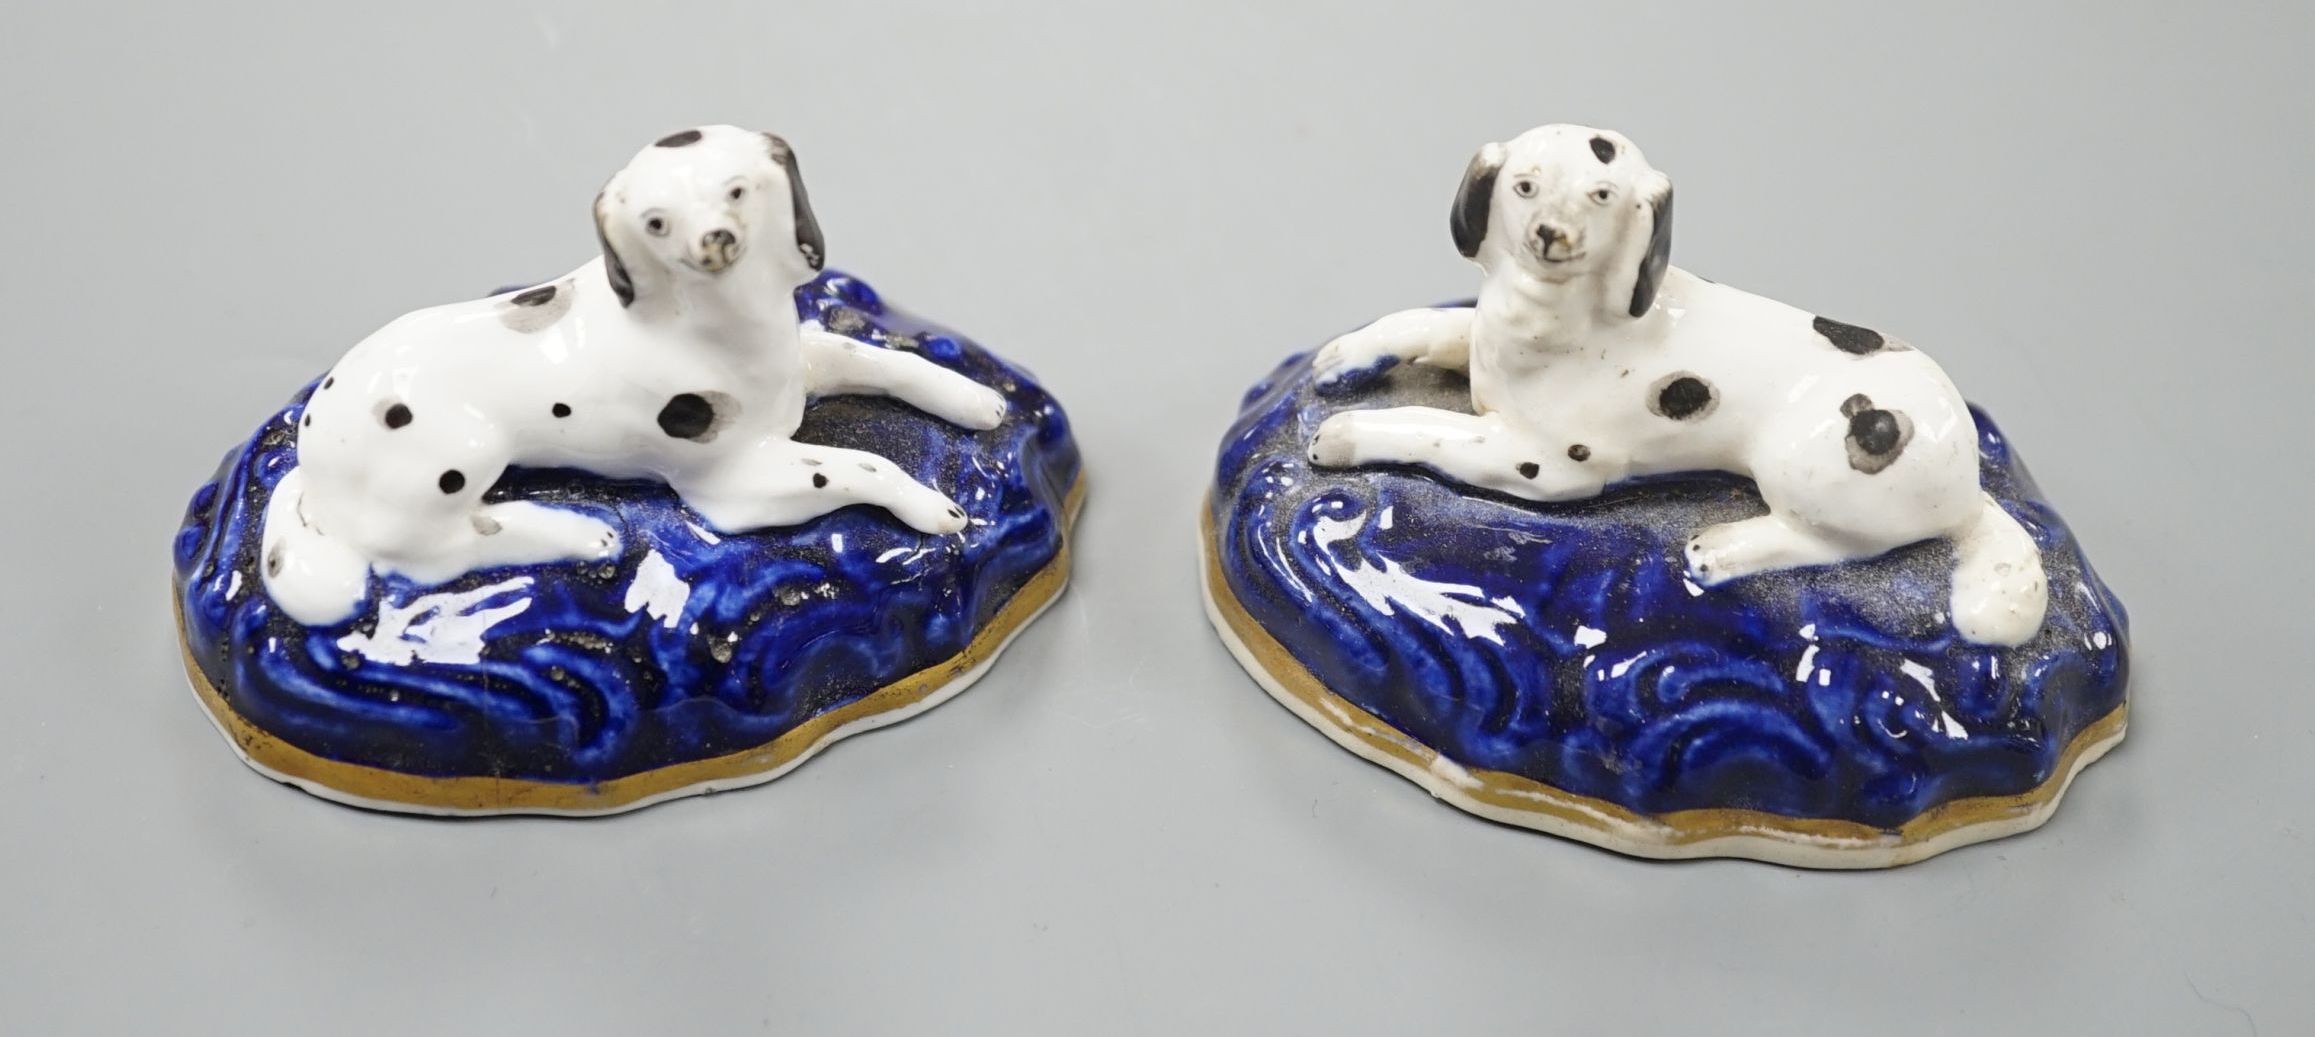 A pair of Samuel Alcock porcelain models of recumbent king Charles spaniels, c.1835-40, impressed mark 18, 7.3 cm long , Cf. Dennis G.Rice Dogs in English porcelain, colour plate 136 and 137., Provenance: Dennis G.Rice c